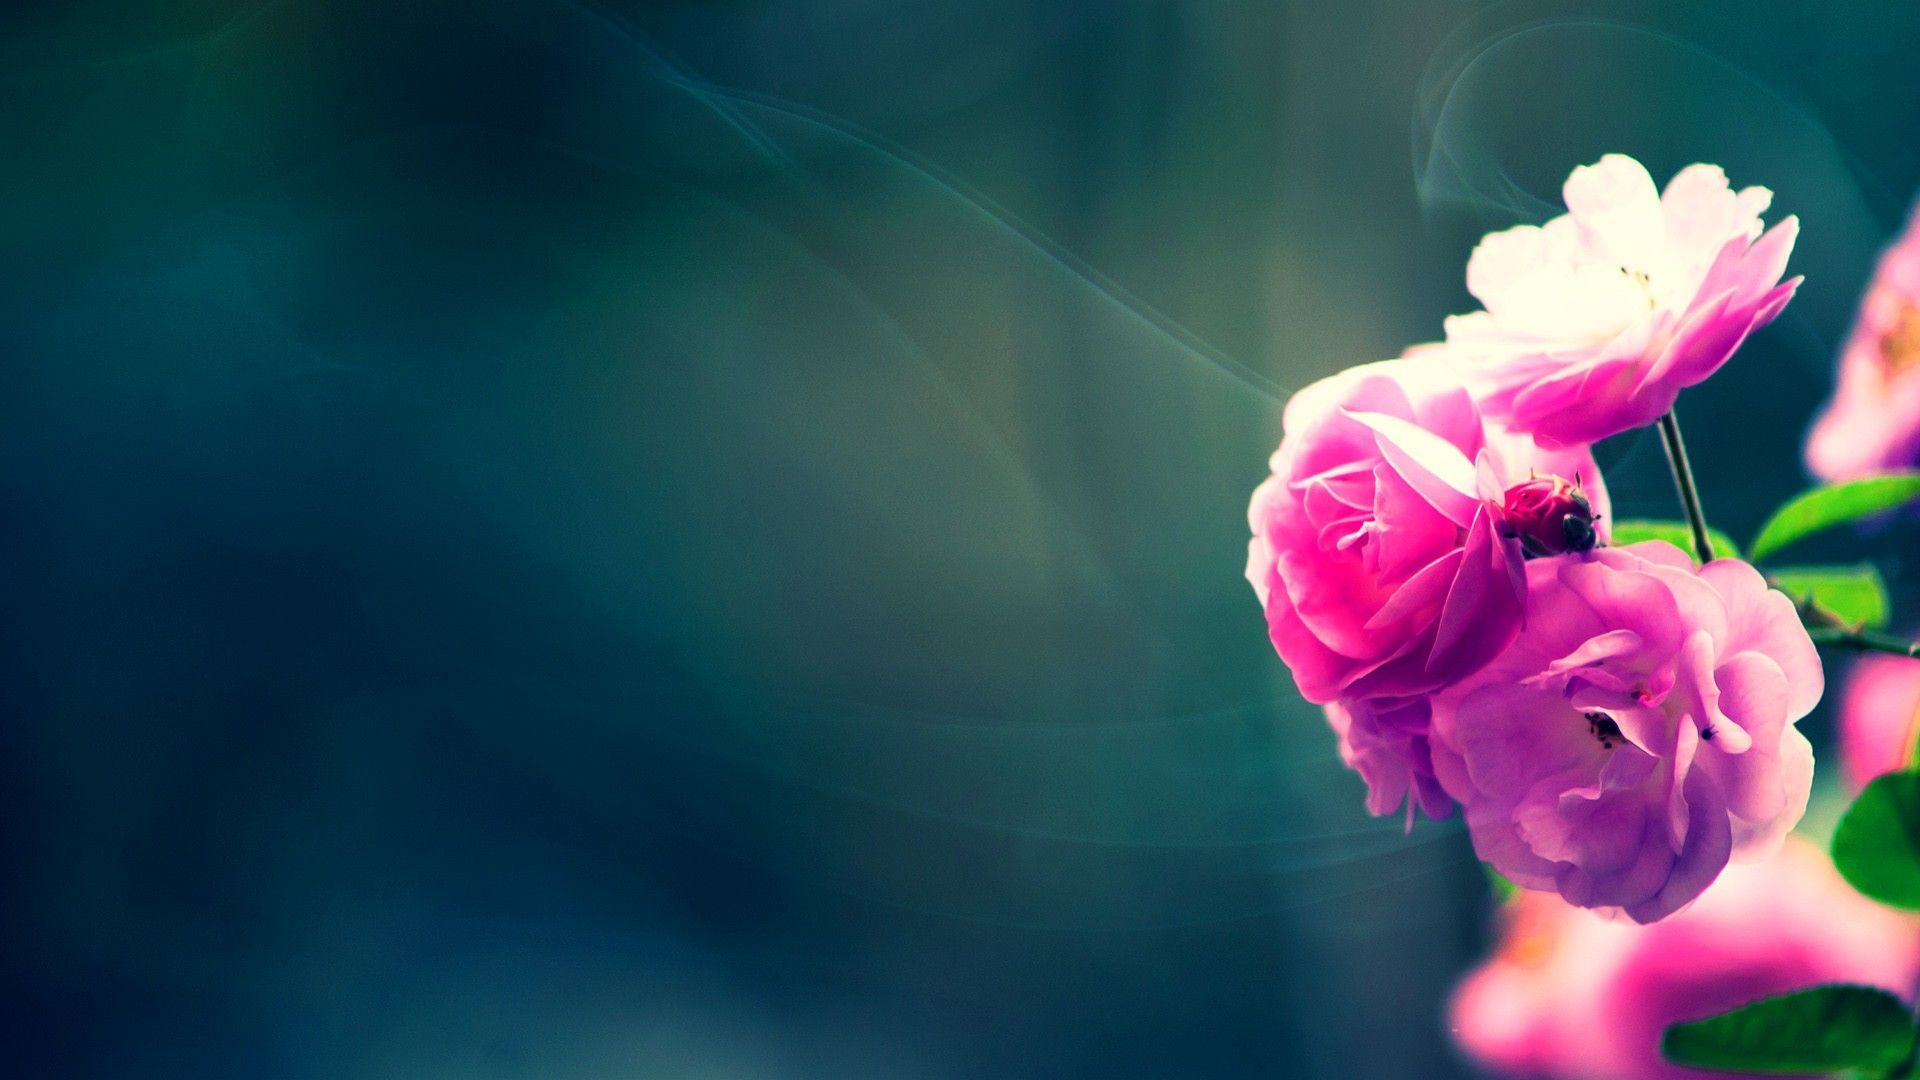 small flower image and wallpaper Download